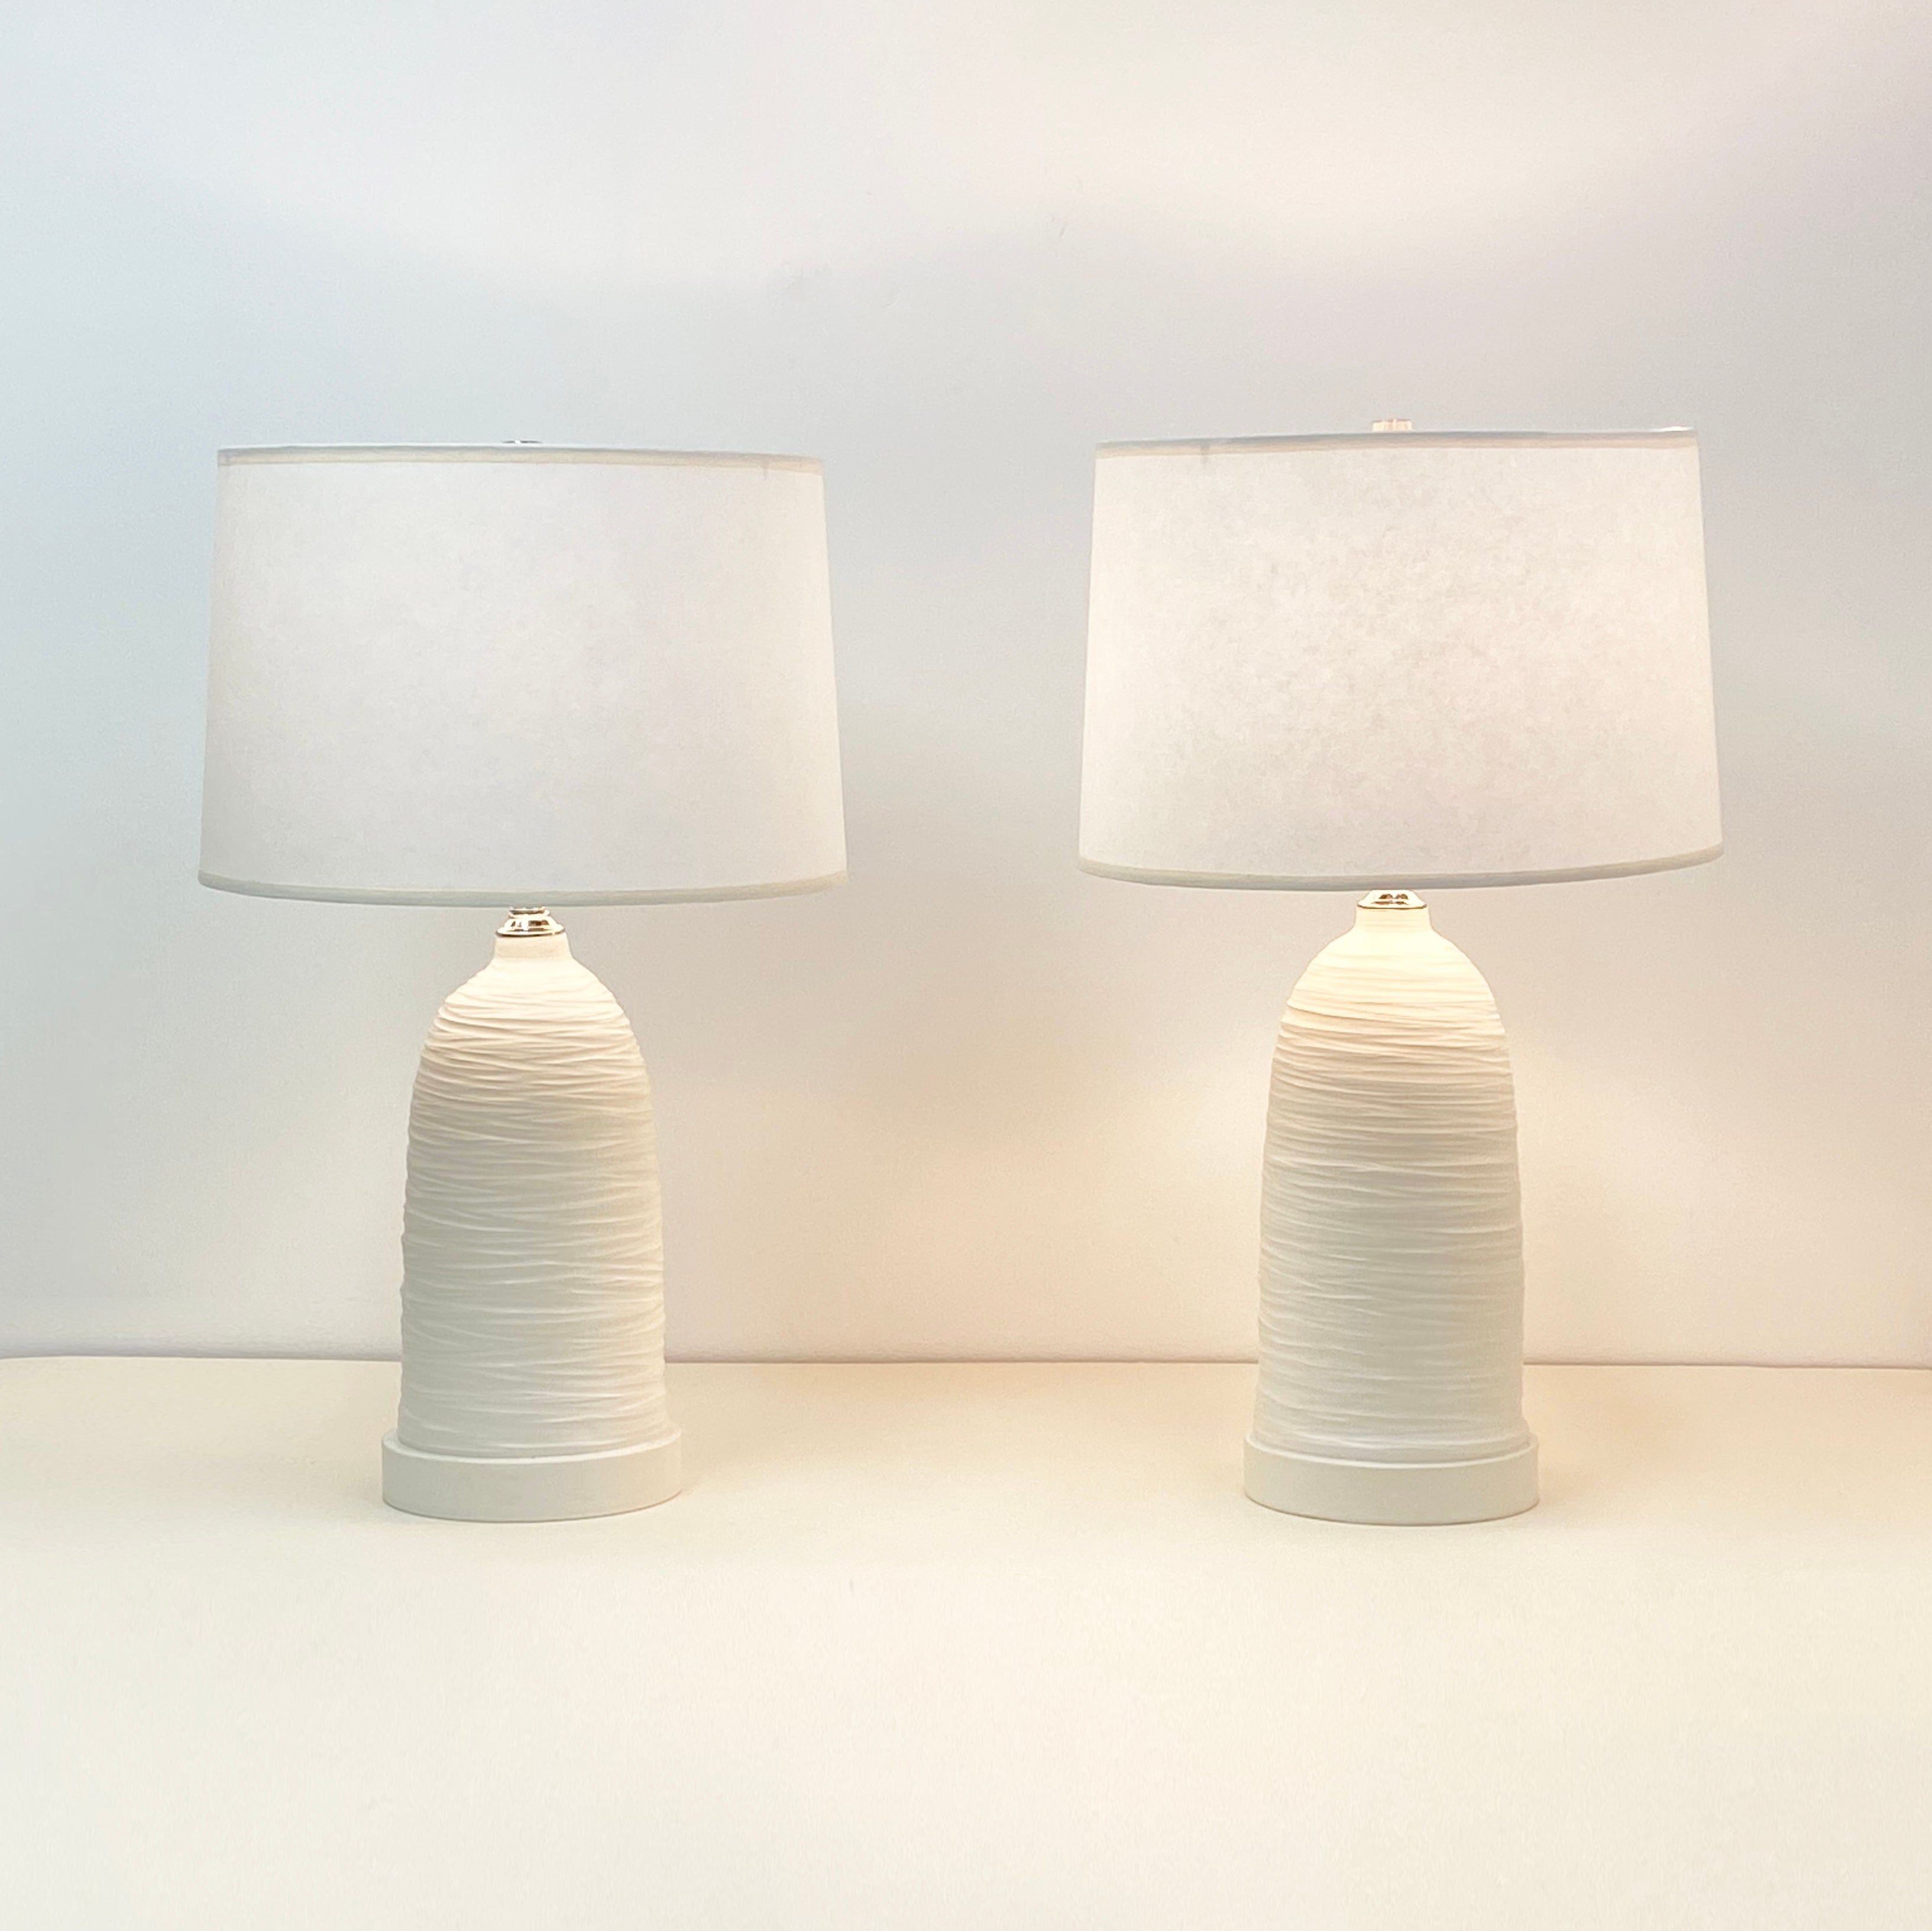 Handmade Wheel-thrown Large Lamp pair Textured deco by Olivia Barry / By Hand For Sale